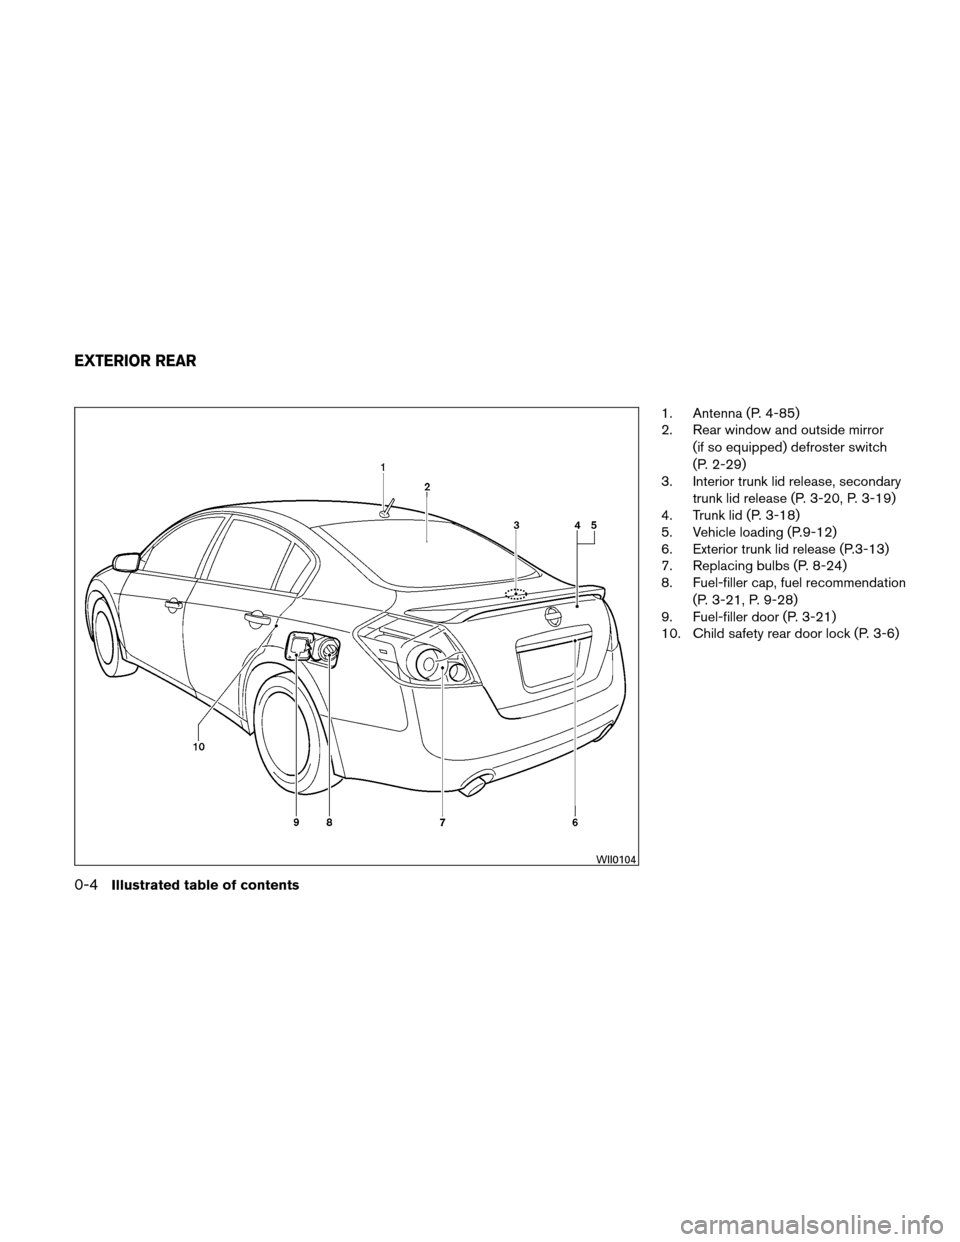 NISSAN ALTIMA HYBRID 2010 L32A / 4.G Owners Manual 1. Antenna (P. 4-85)
2. Rear window and outside mirror(if so equipped) defroster switch
(P. 2-29)
3. Interior trunk lid release, secondary
trunk lid release (P. 3-20, P. 3-19)
4. Trunk lid (P. 3-18)
5